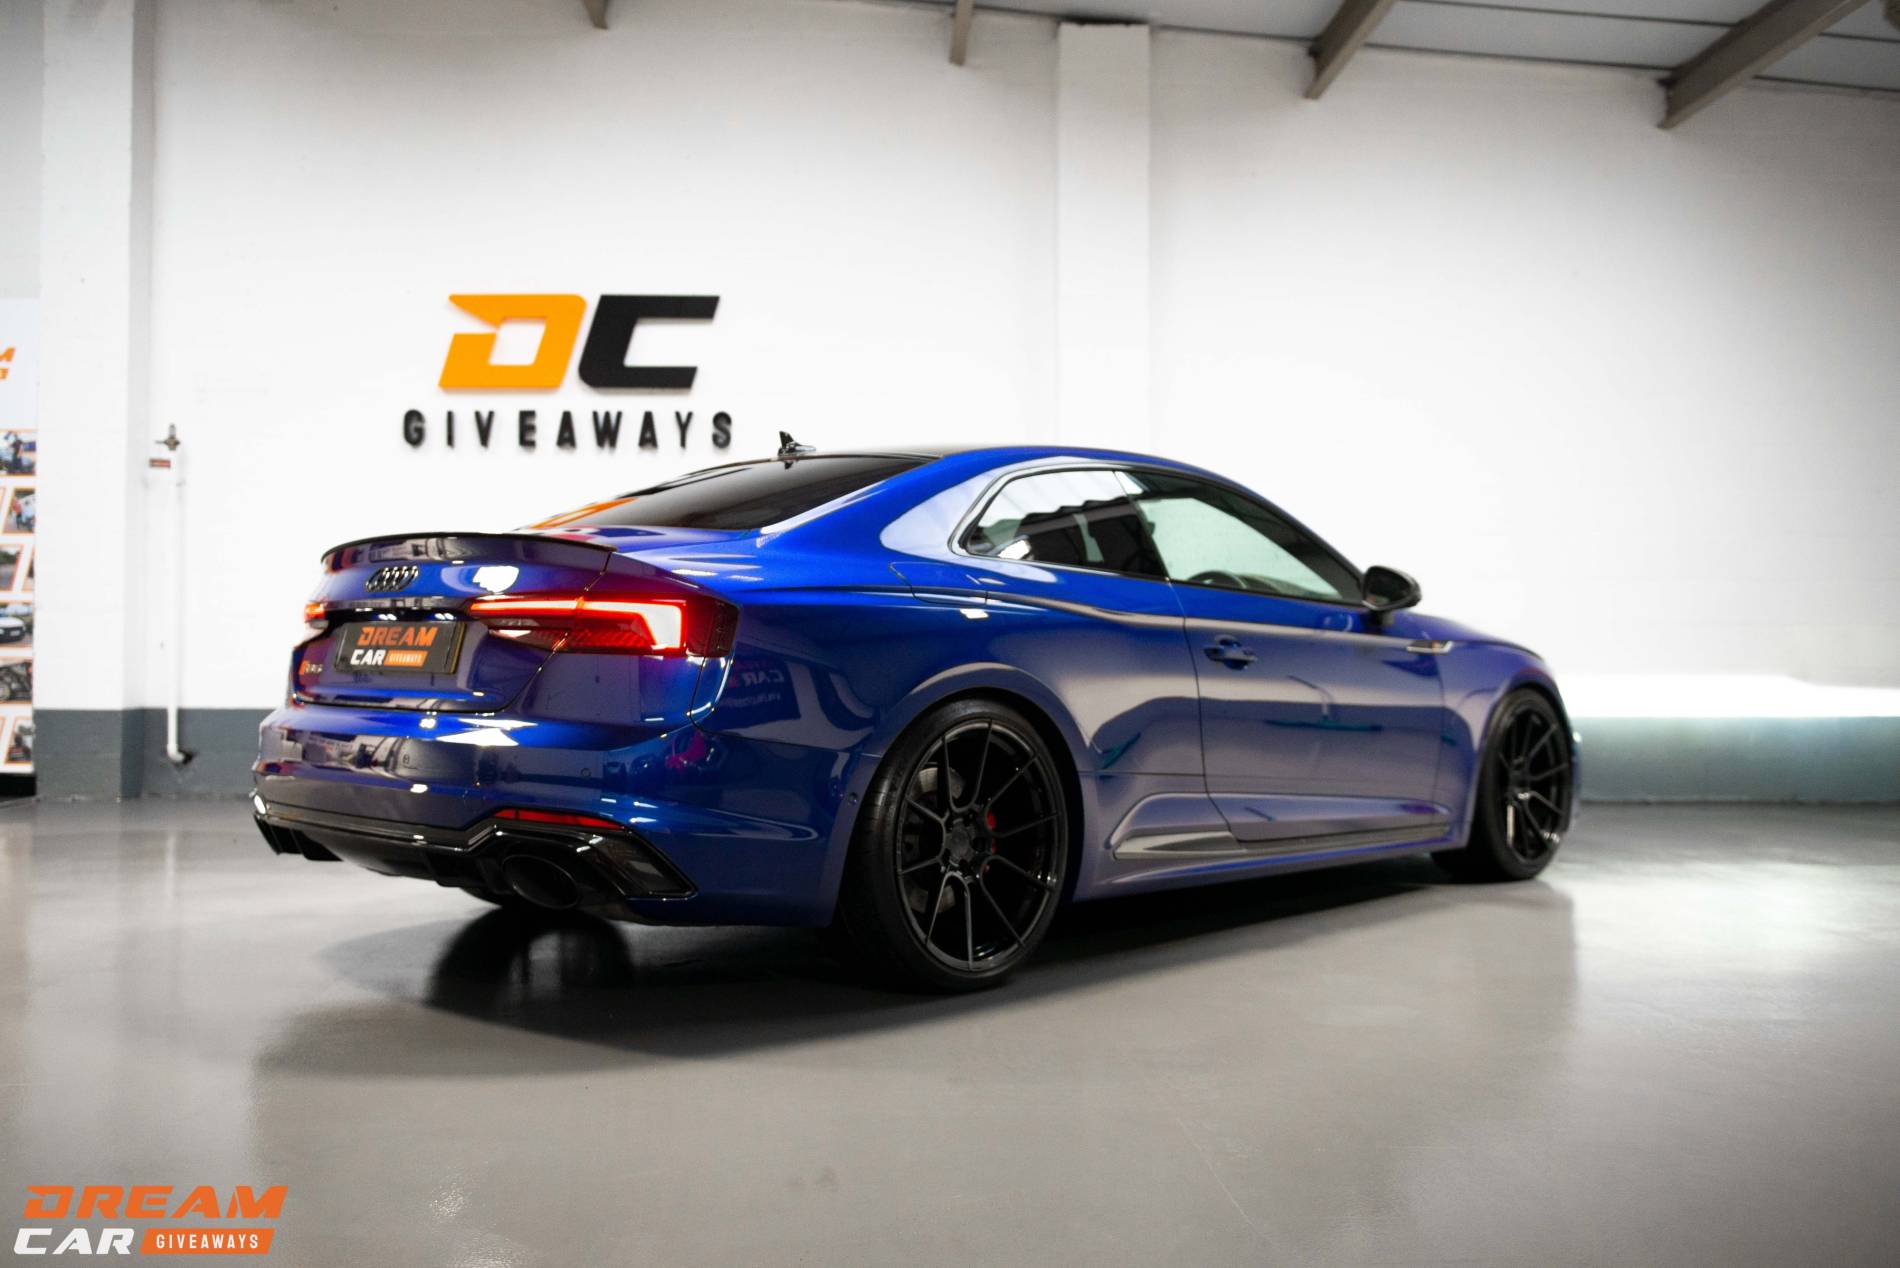 Audi RS5 Carbon Edition & £2000 or £40,000 Tax Free